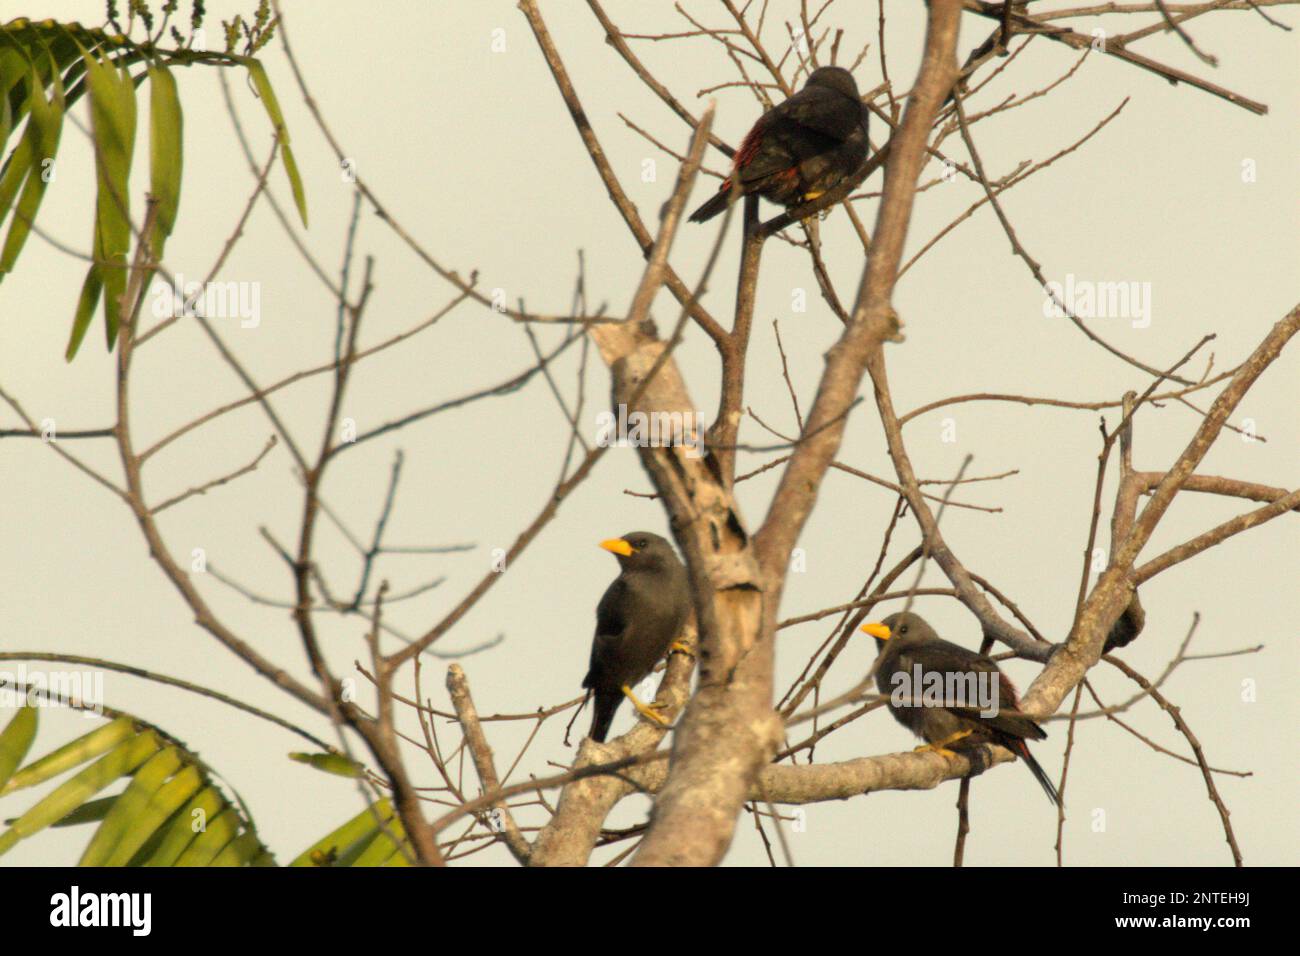 A flock of grosbeak starling (Scissirostrum dubium), a Sulawesi endemic starling, on deciduous tree in a forested area near Mount Tangkoko and Duasudara in Bitung, North Sulawesi, Indonesia. Stock Photo